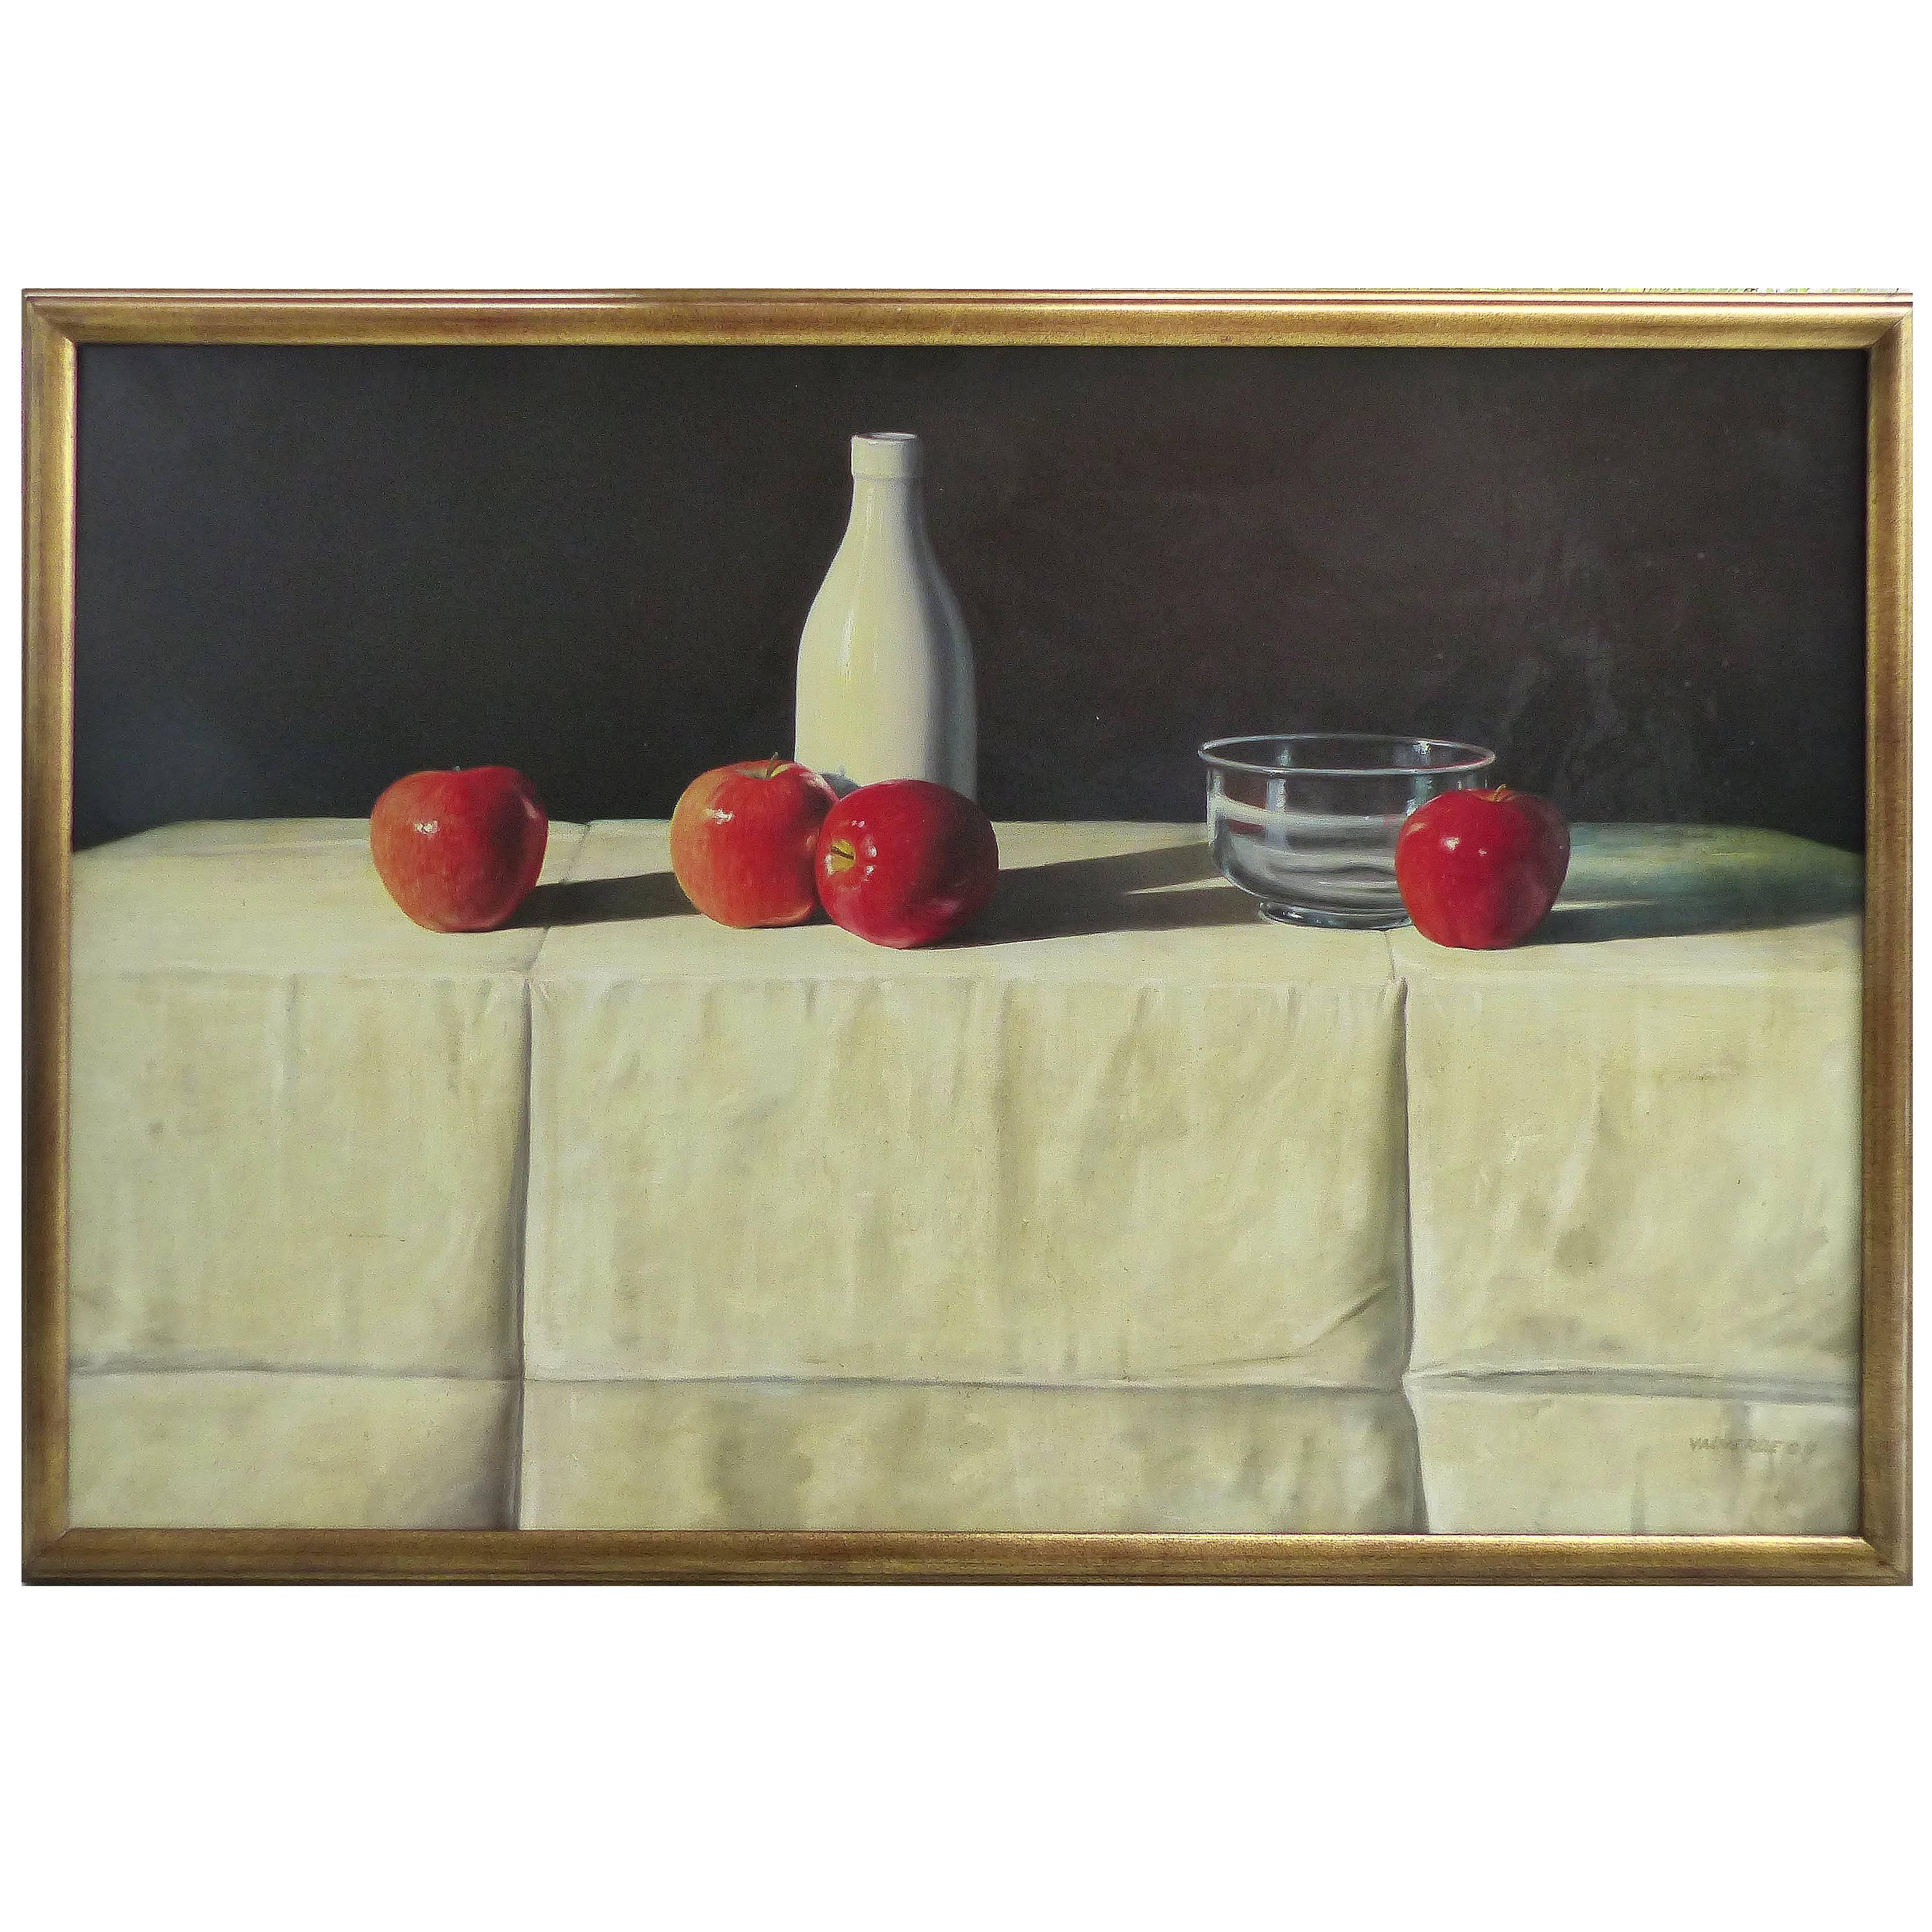 Contemporary Realism Still Life Oil on Canvas with Apples by G. B. Valverde